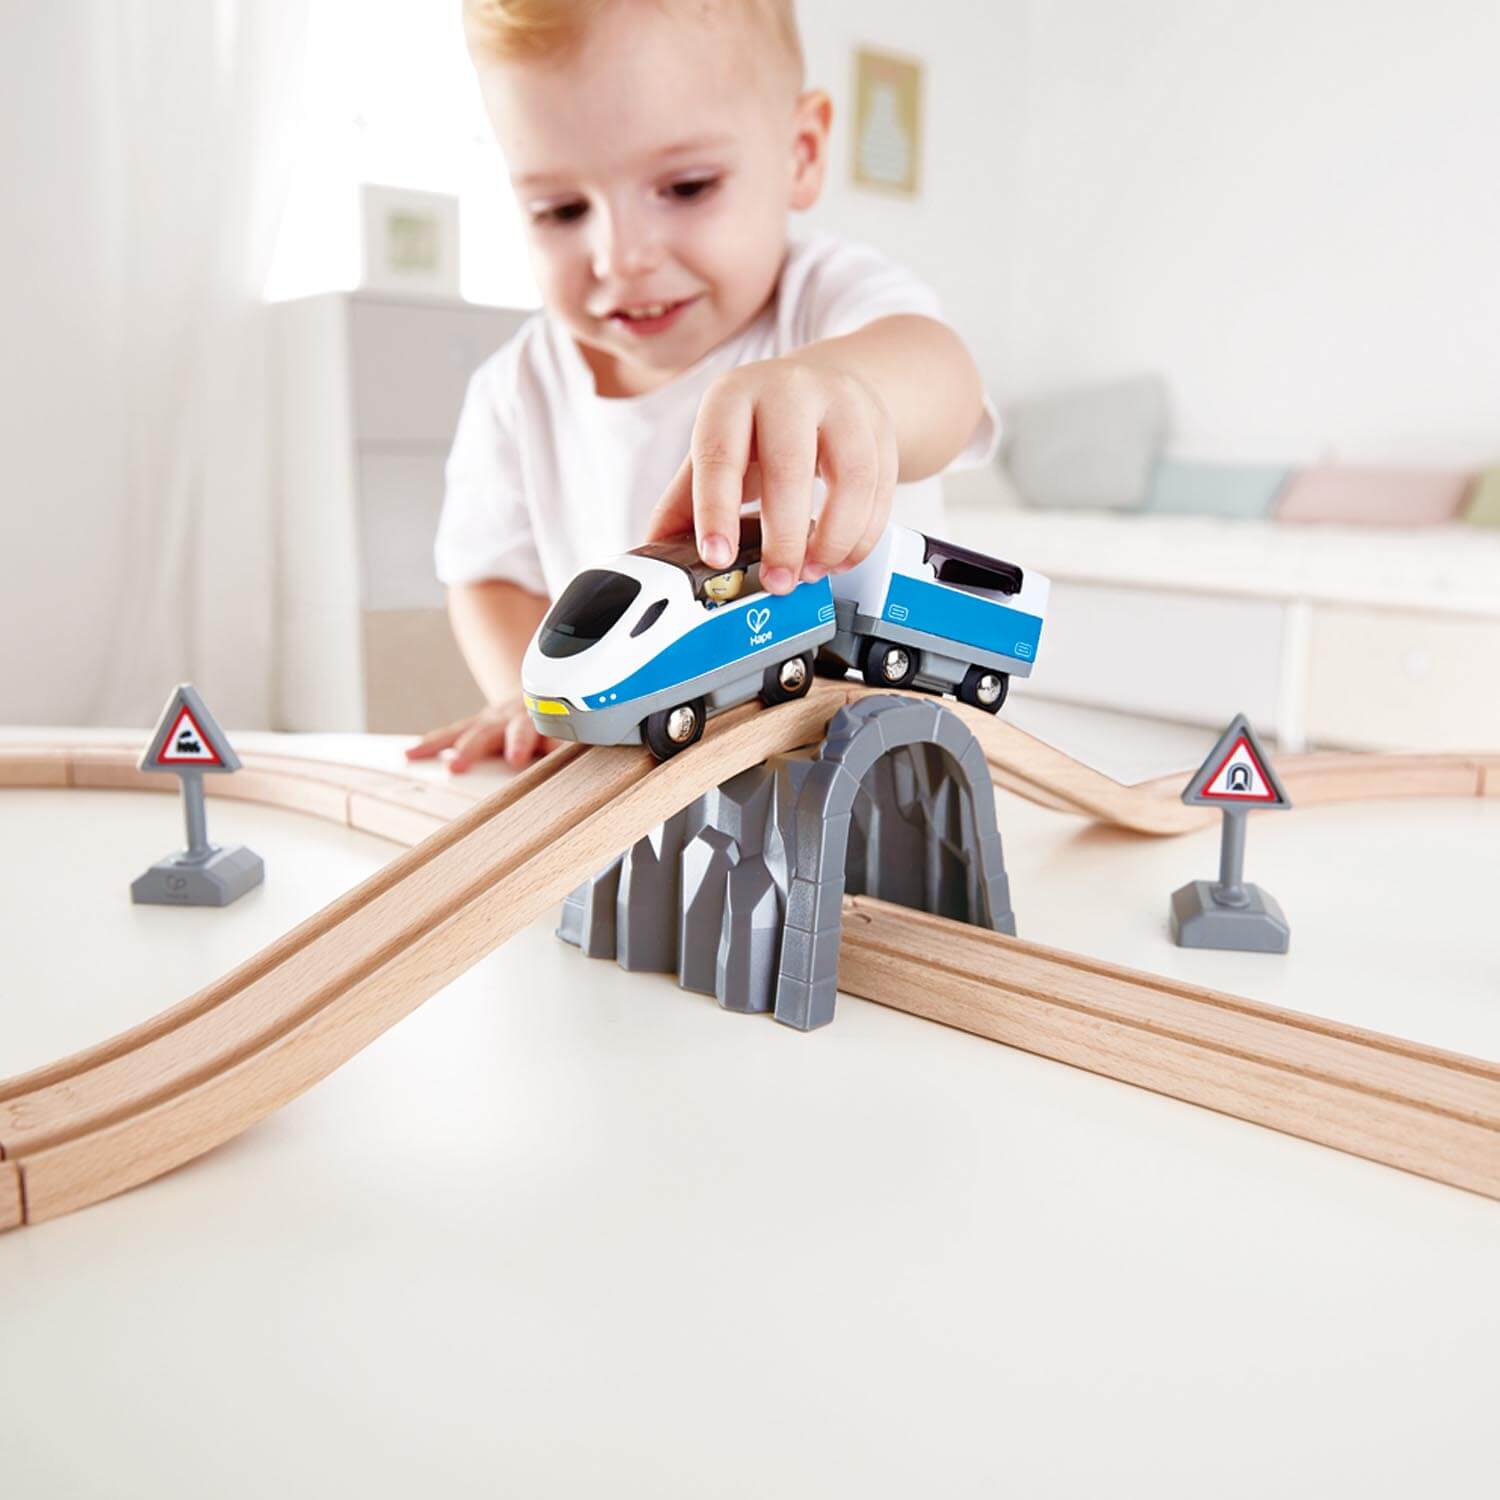 Small child playing with the Hape Railway Figure 8 Safety Wooden Train Set and pushing the train over the bridge.